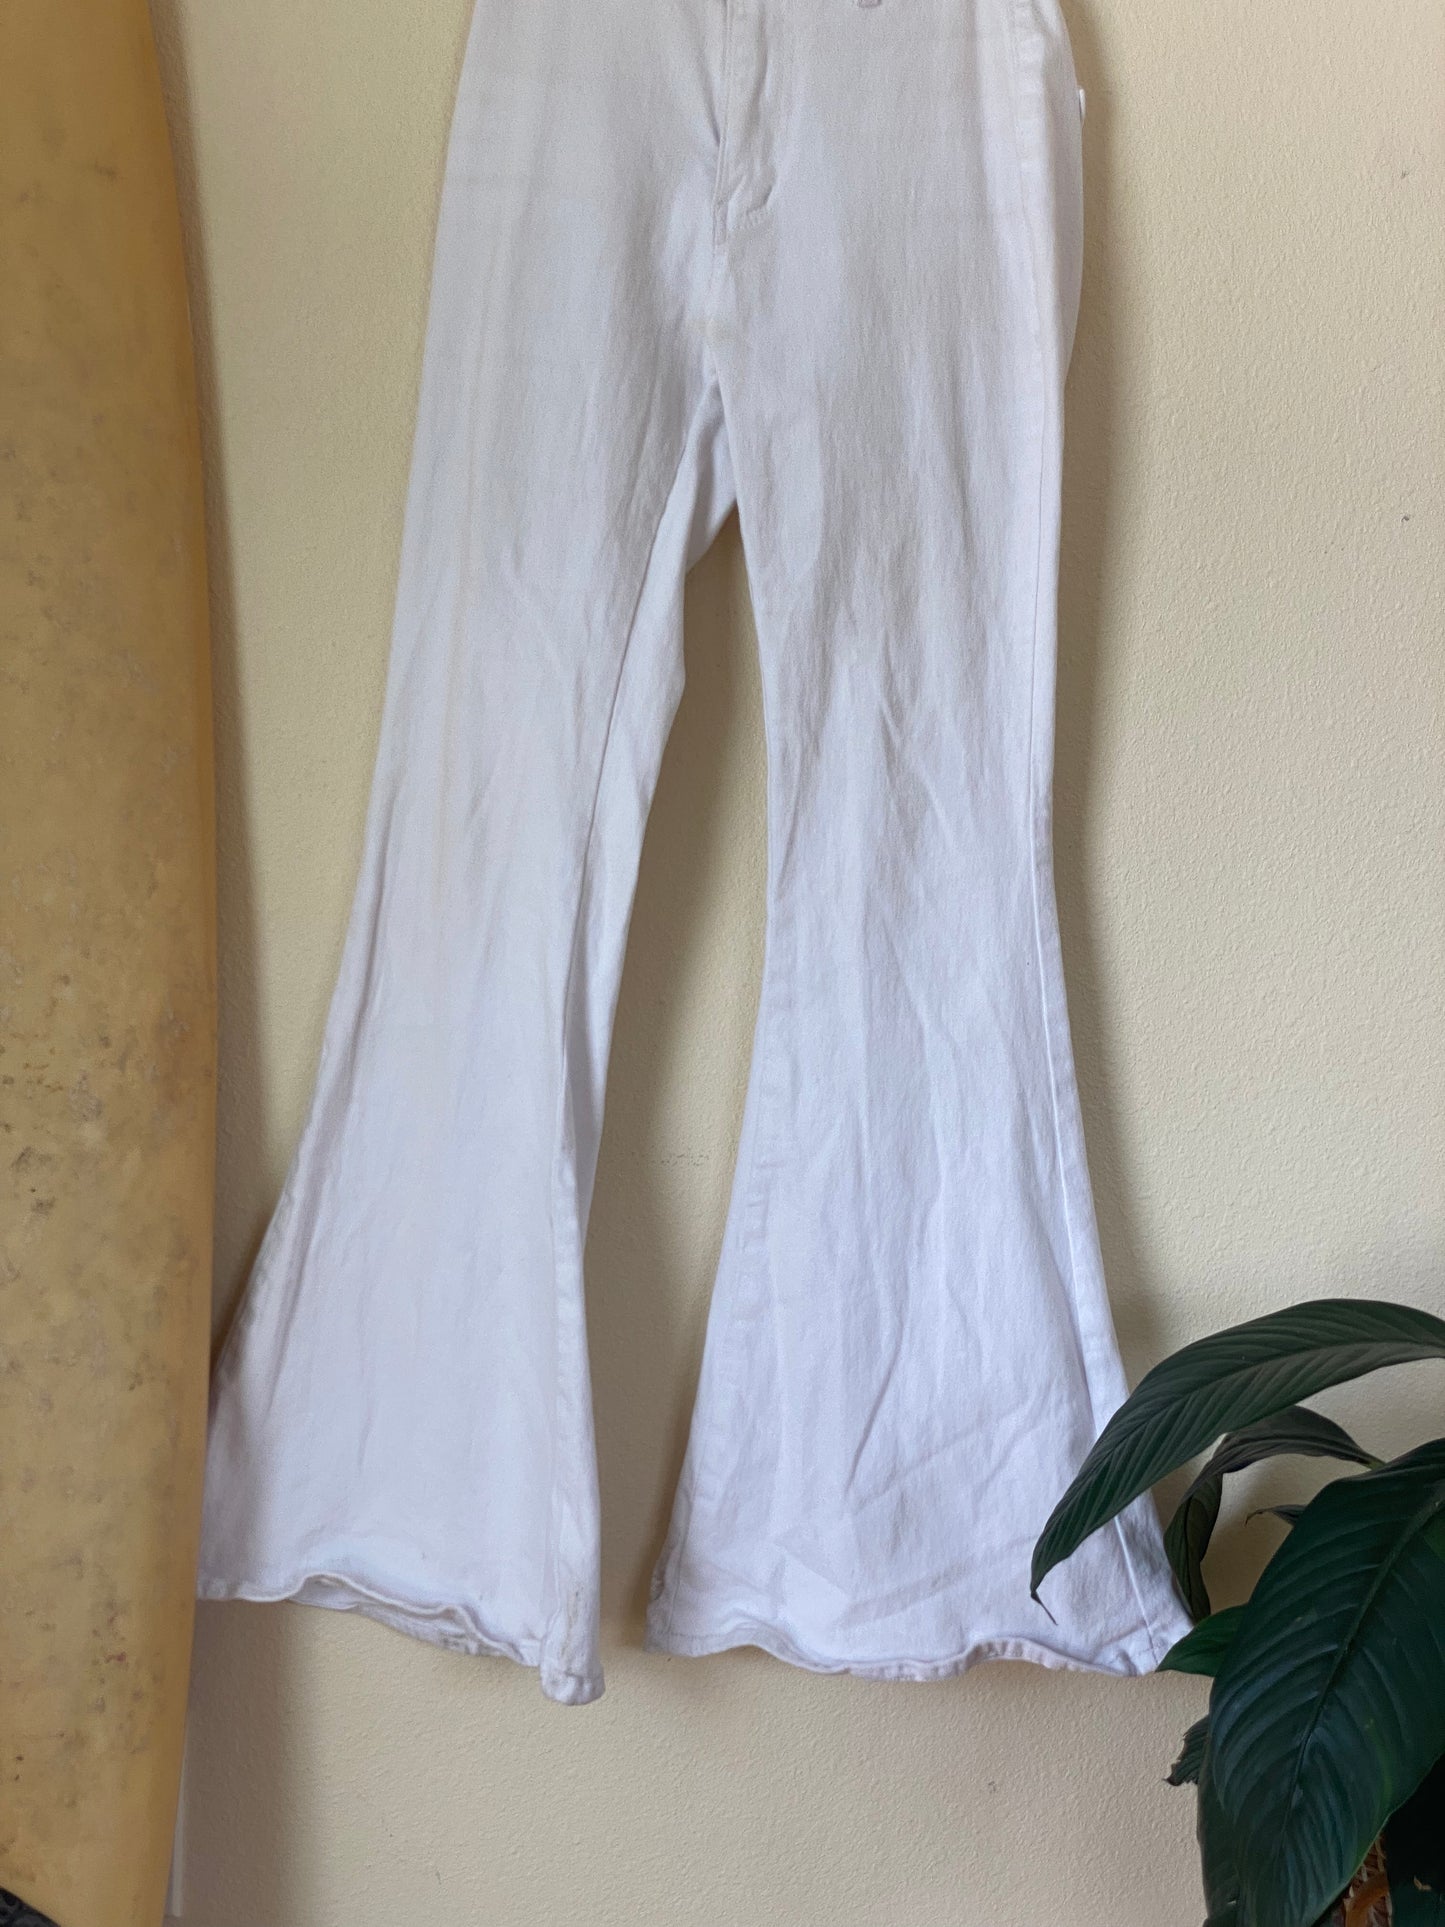 White High Waisted Flare Jeans SIZE 25